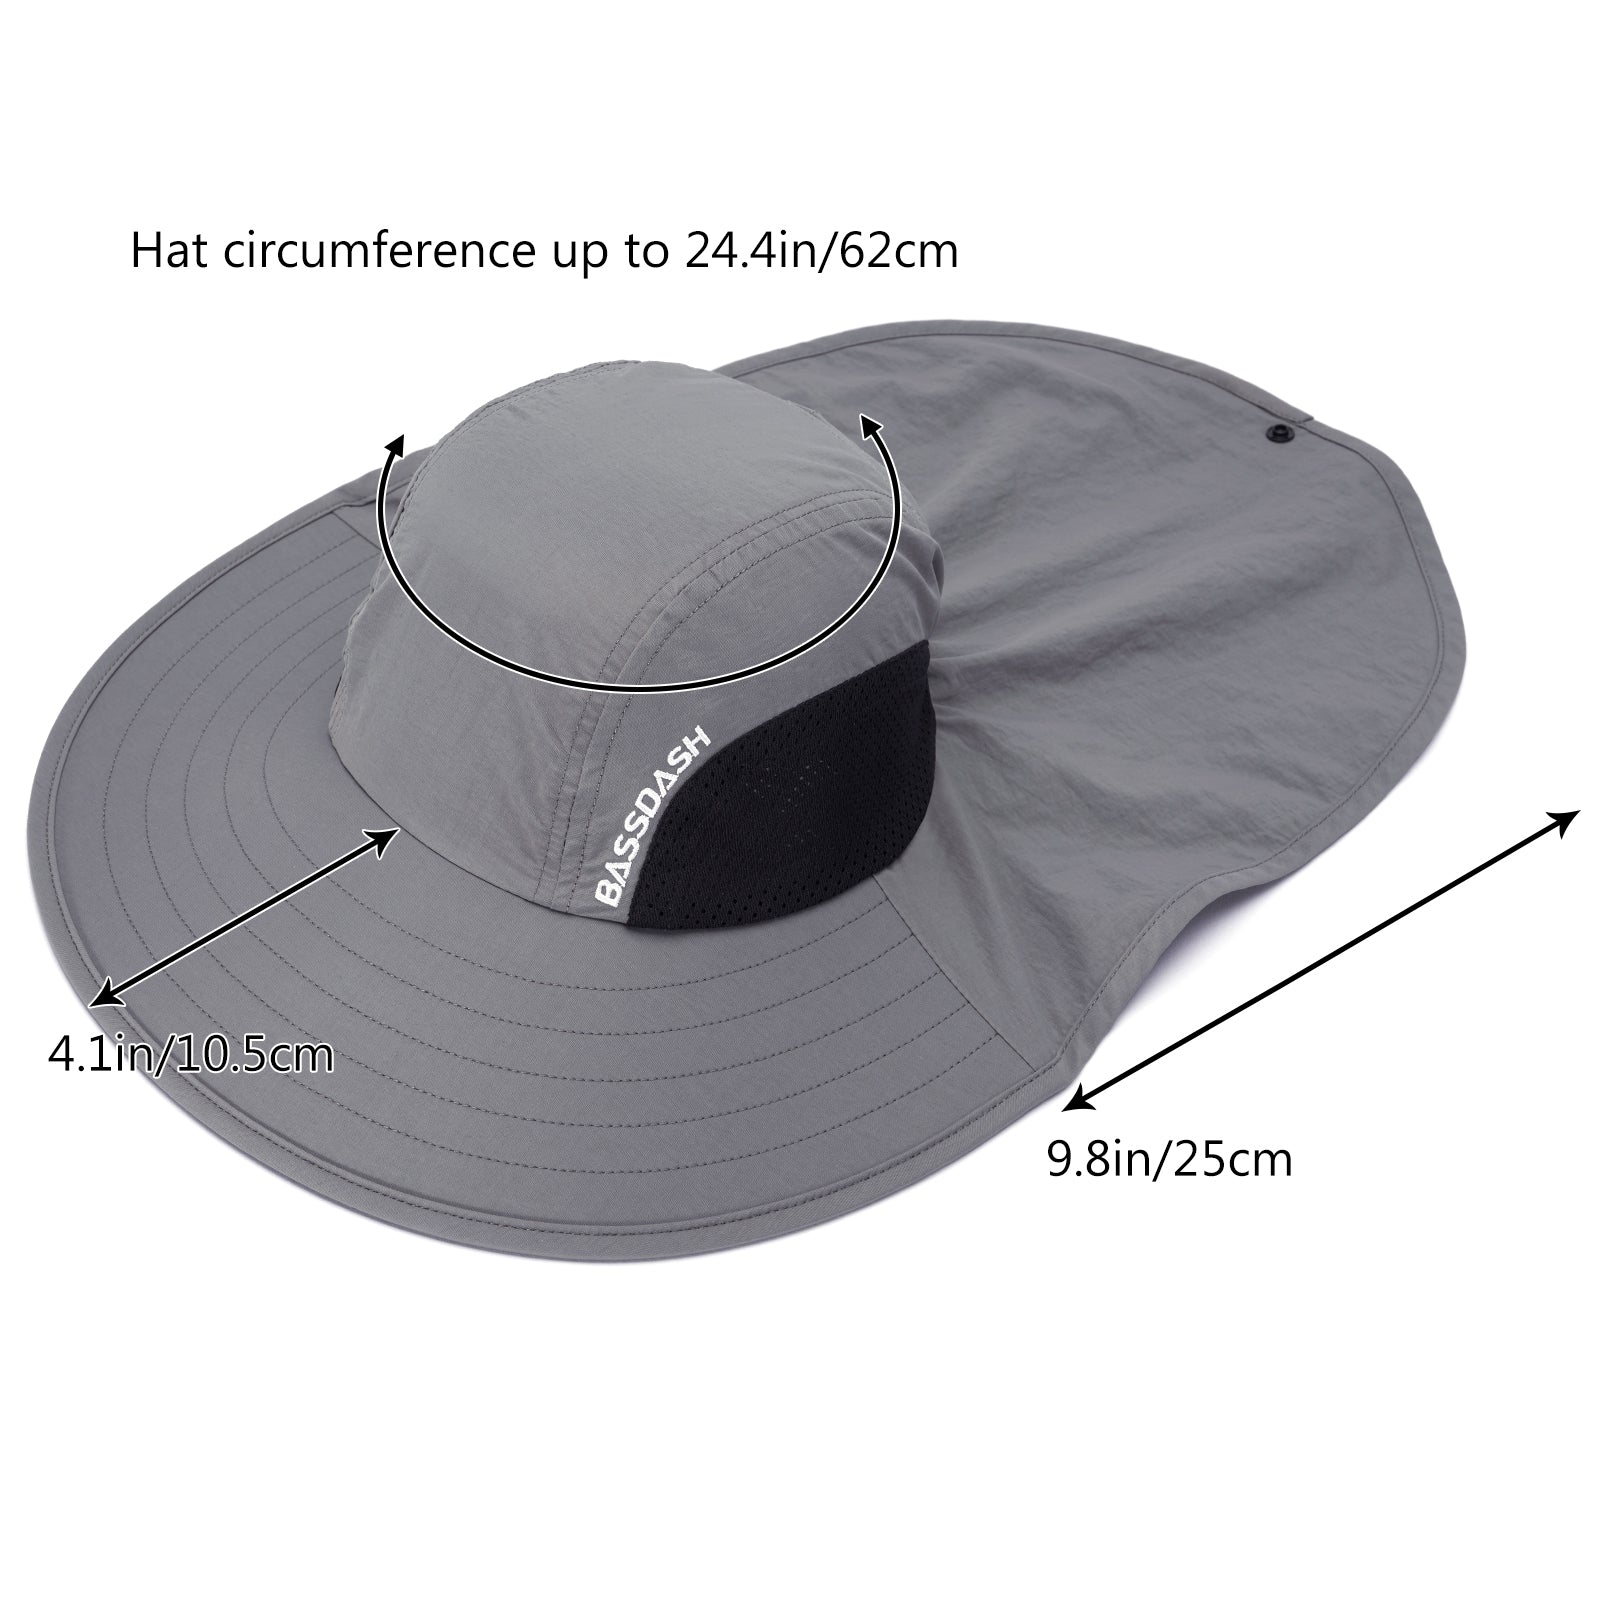 Extra Large Lightweight Bucket Sun Hat,Breathable Travel Cooling